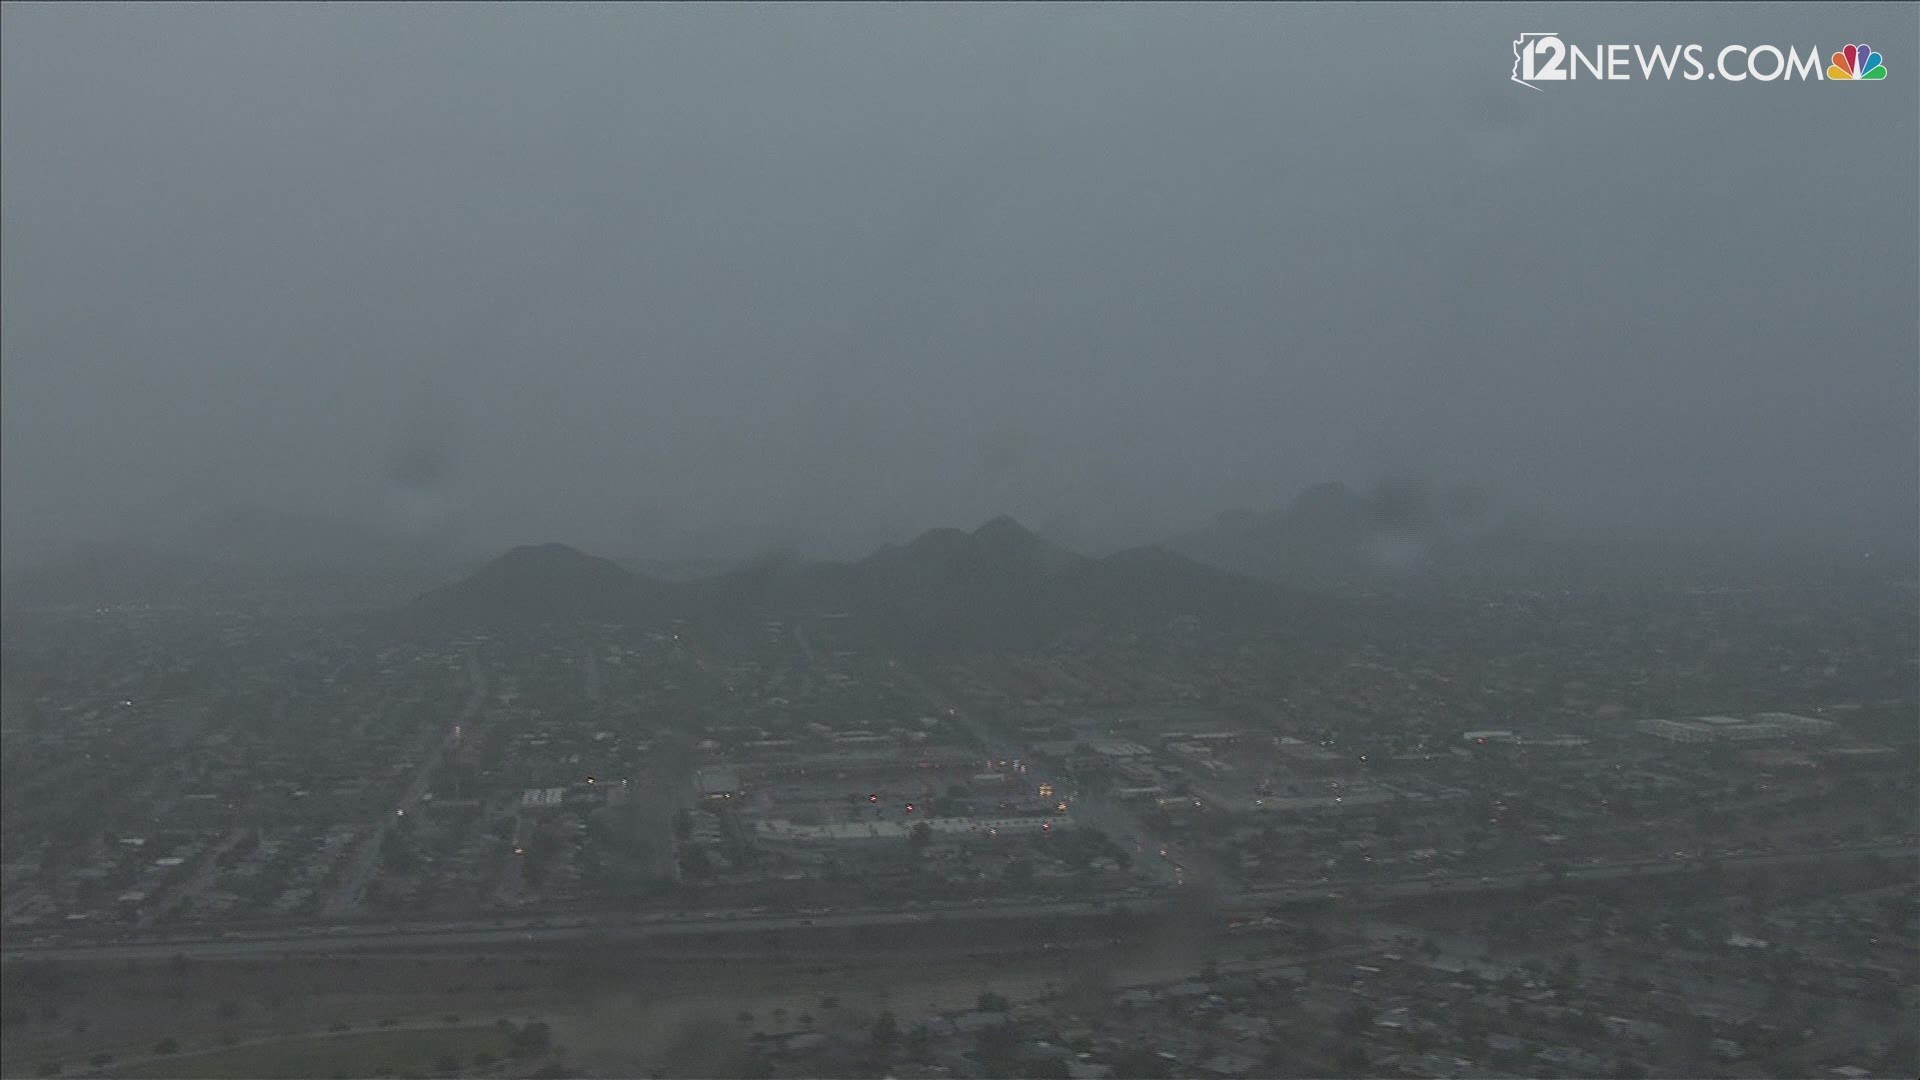 Phoenix just had its 2nd wettest October day and 9th wettest day ever with 2.24".